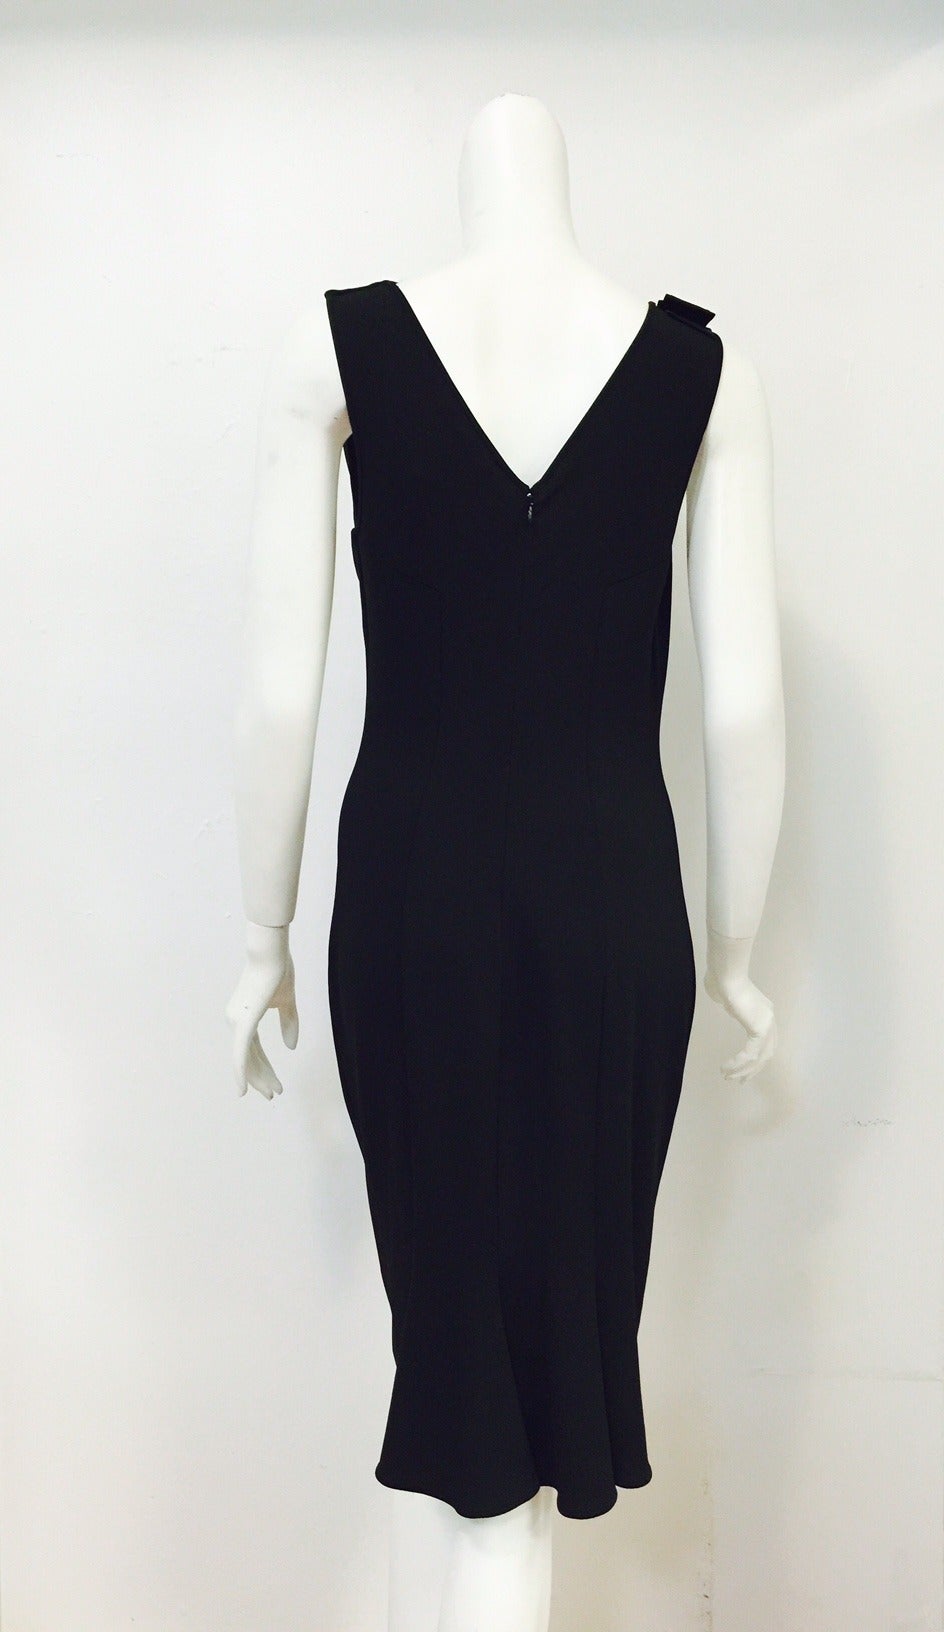 Beguiling Blumarine Sleeveless Jersey Cocktail Sheath In Excellent Condition For Sale In Palm Beach, FL